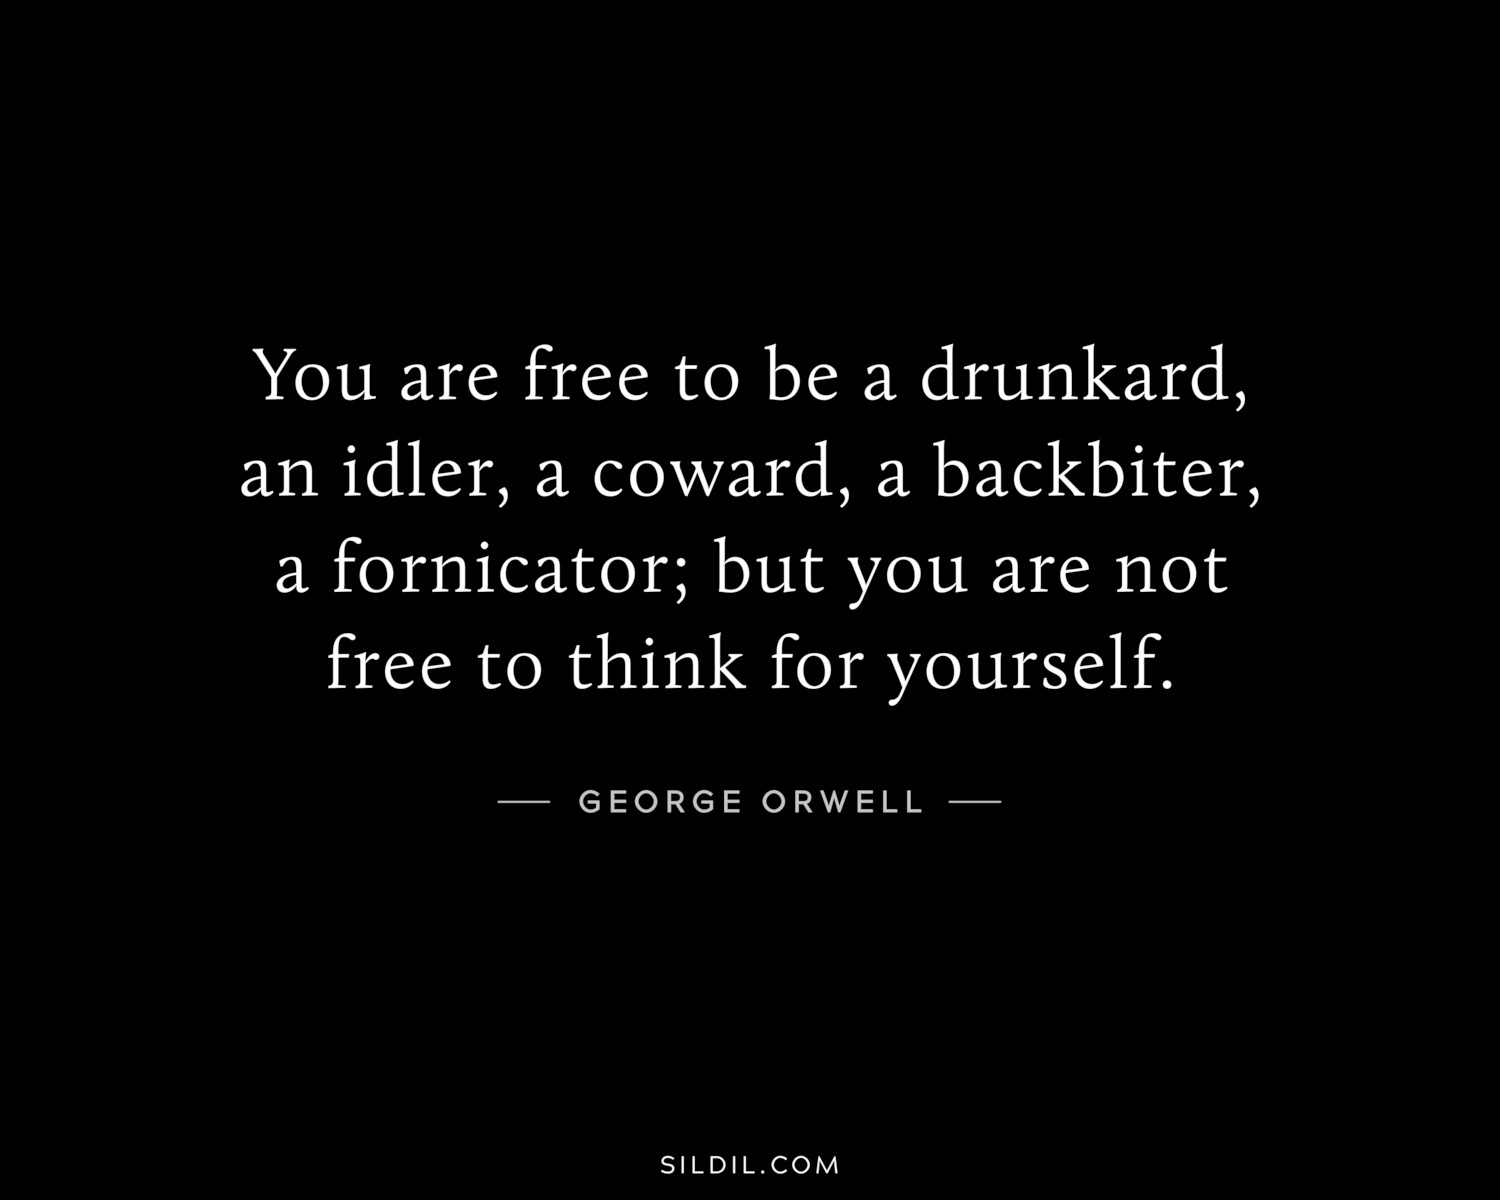 You are free to be a drunkard, an idler, a coward, a backbiter, a fornicator; but you are not free to think for yourself.